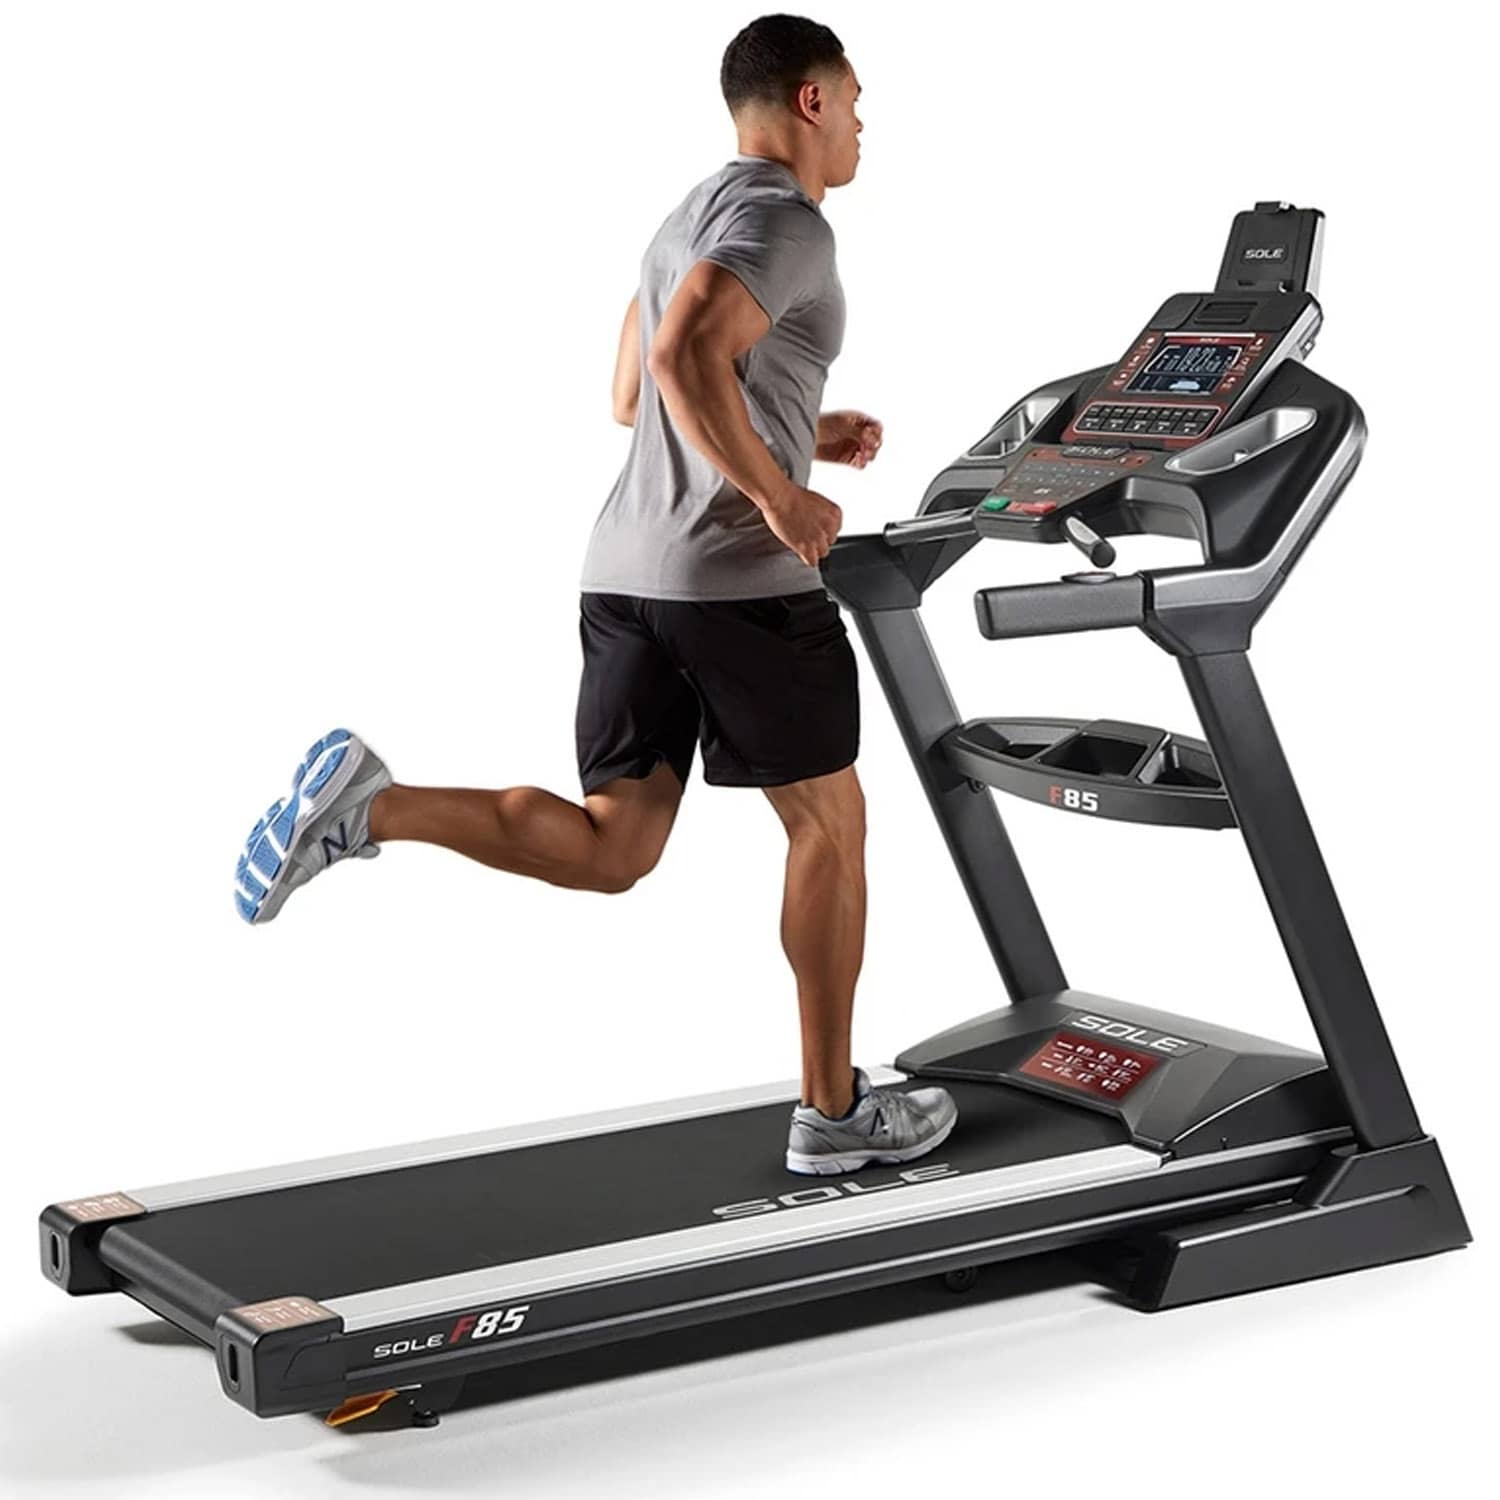 ARGT Sole Fitness F85 Home Use Treadmill